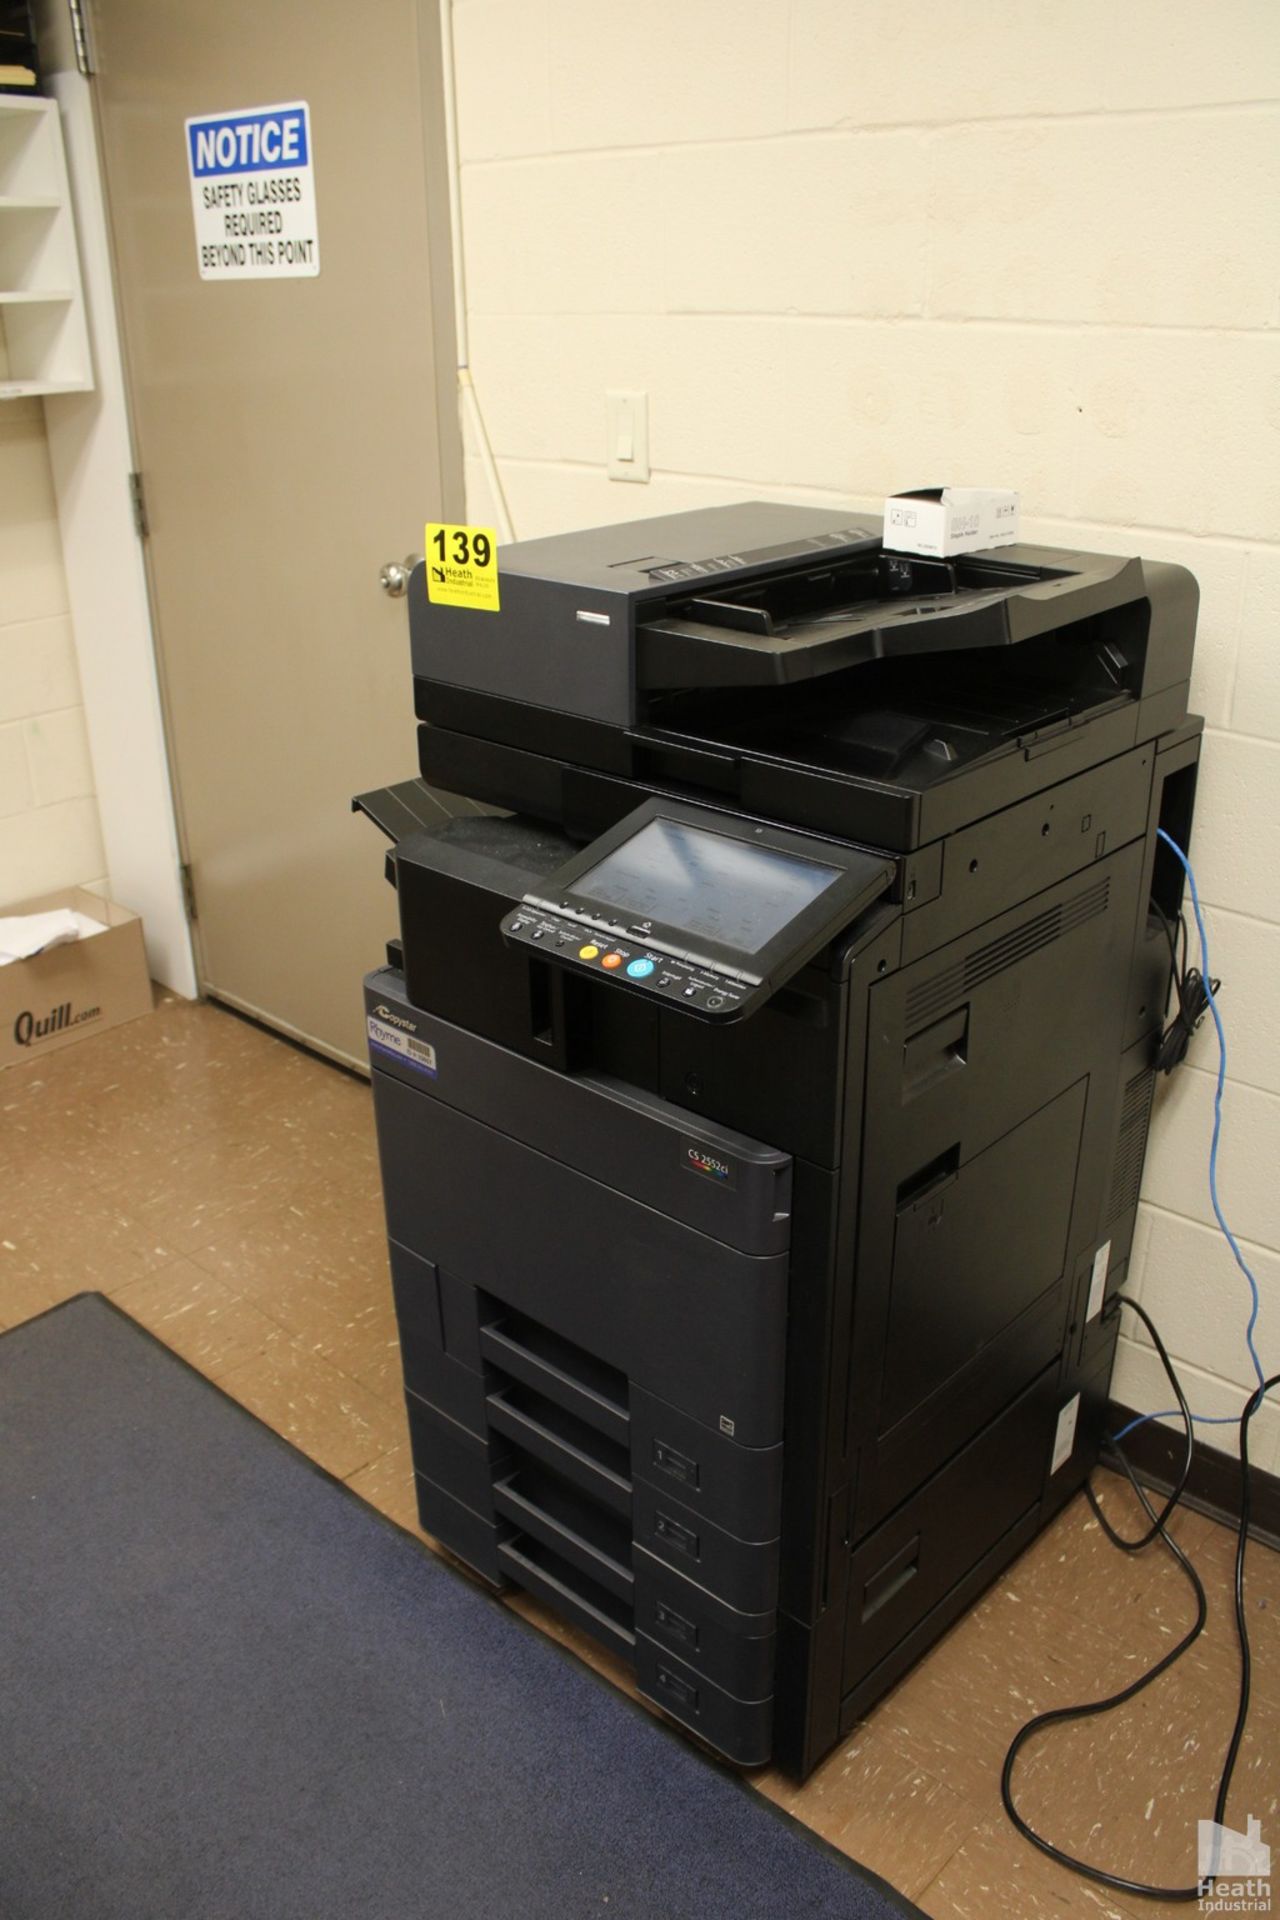 COPYSTAR MODEL CS2552CI COLOR COPIER WITH FOUR DRAWERS, 261,023 IMAGE COUNT - Image 3 of 4